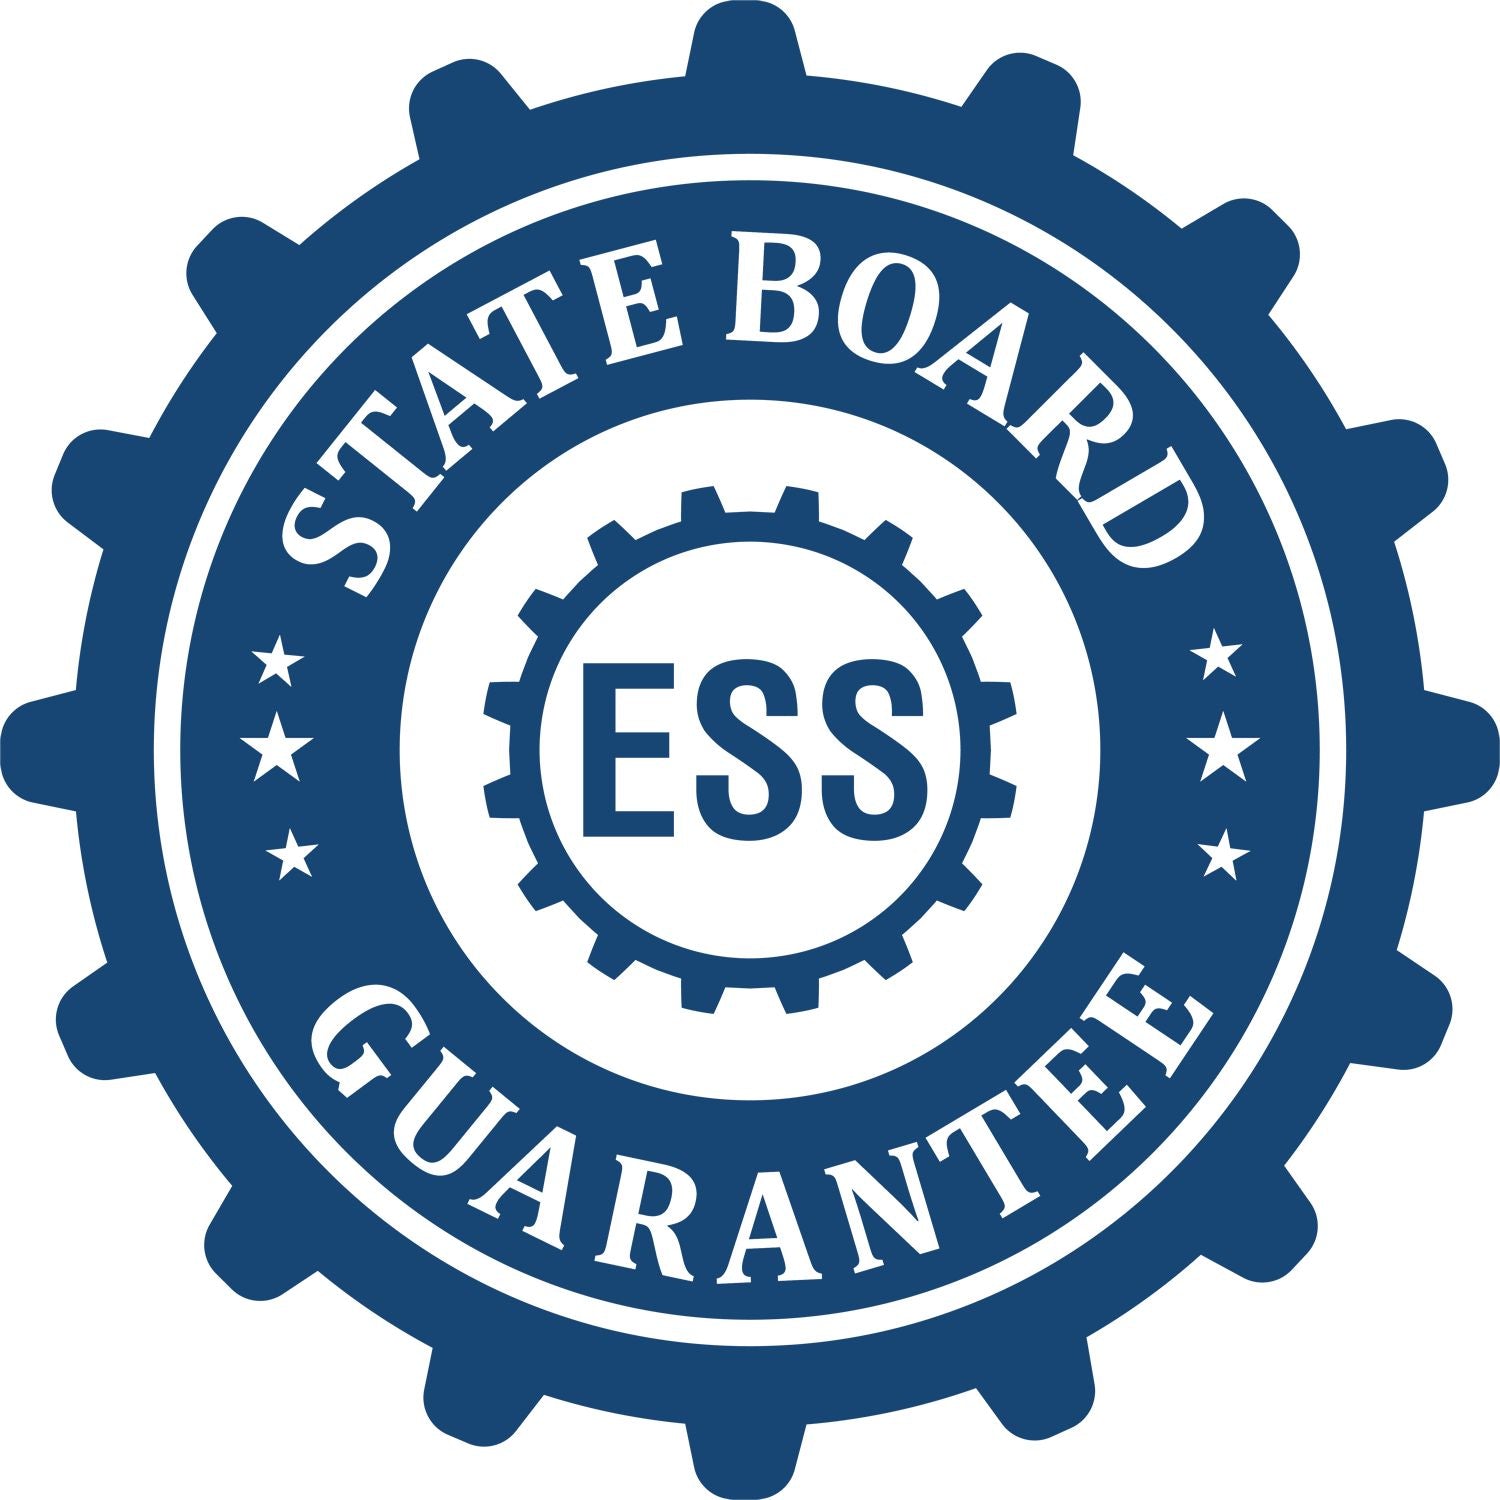 An emblem in a gear shape illustrating a state board guarantee for the Premium MaxLight Pre-Inked Puerto Rico Engineering Stamp product.